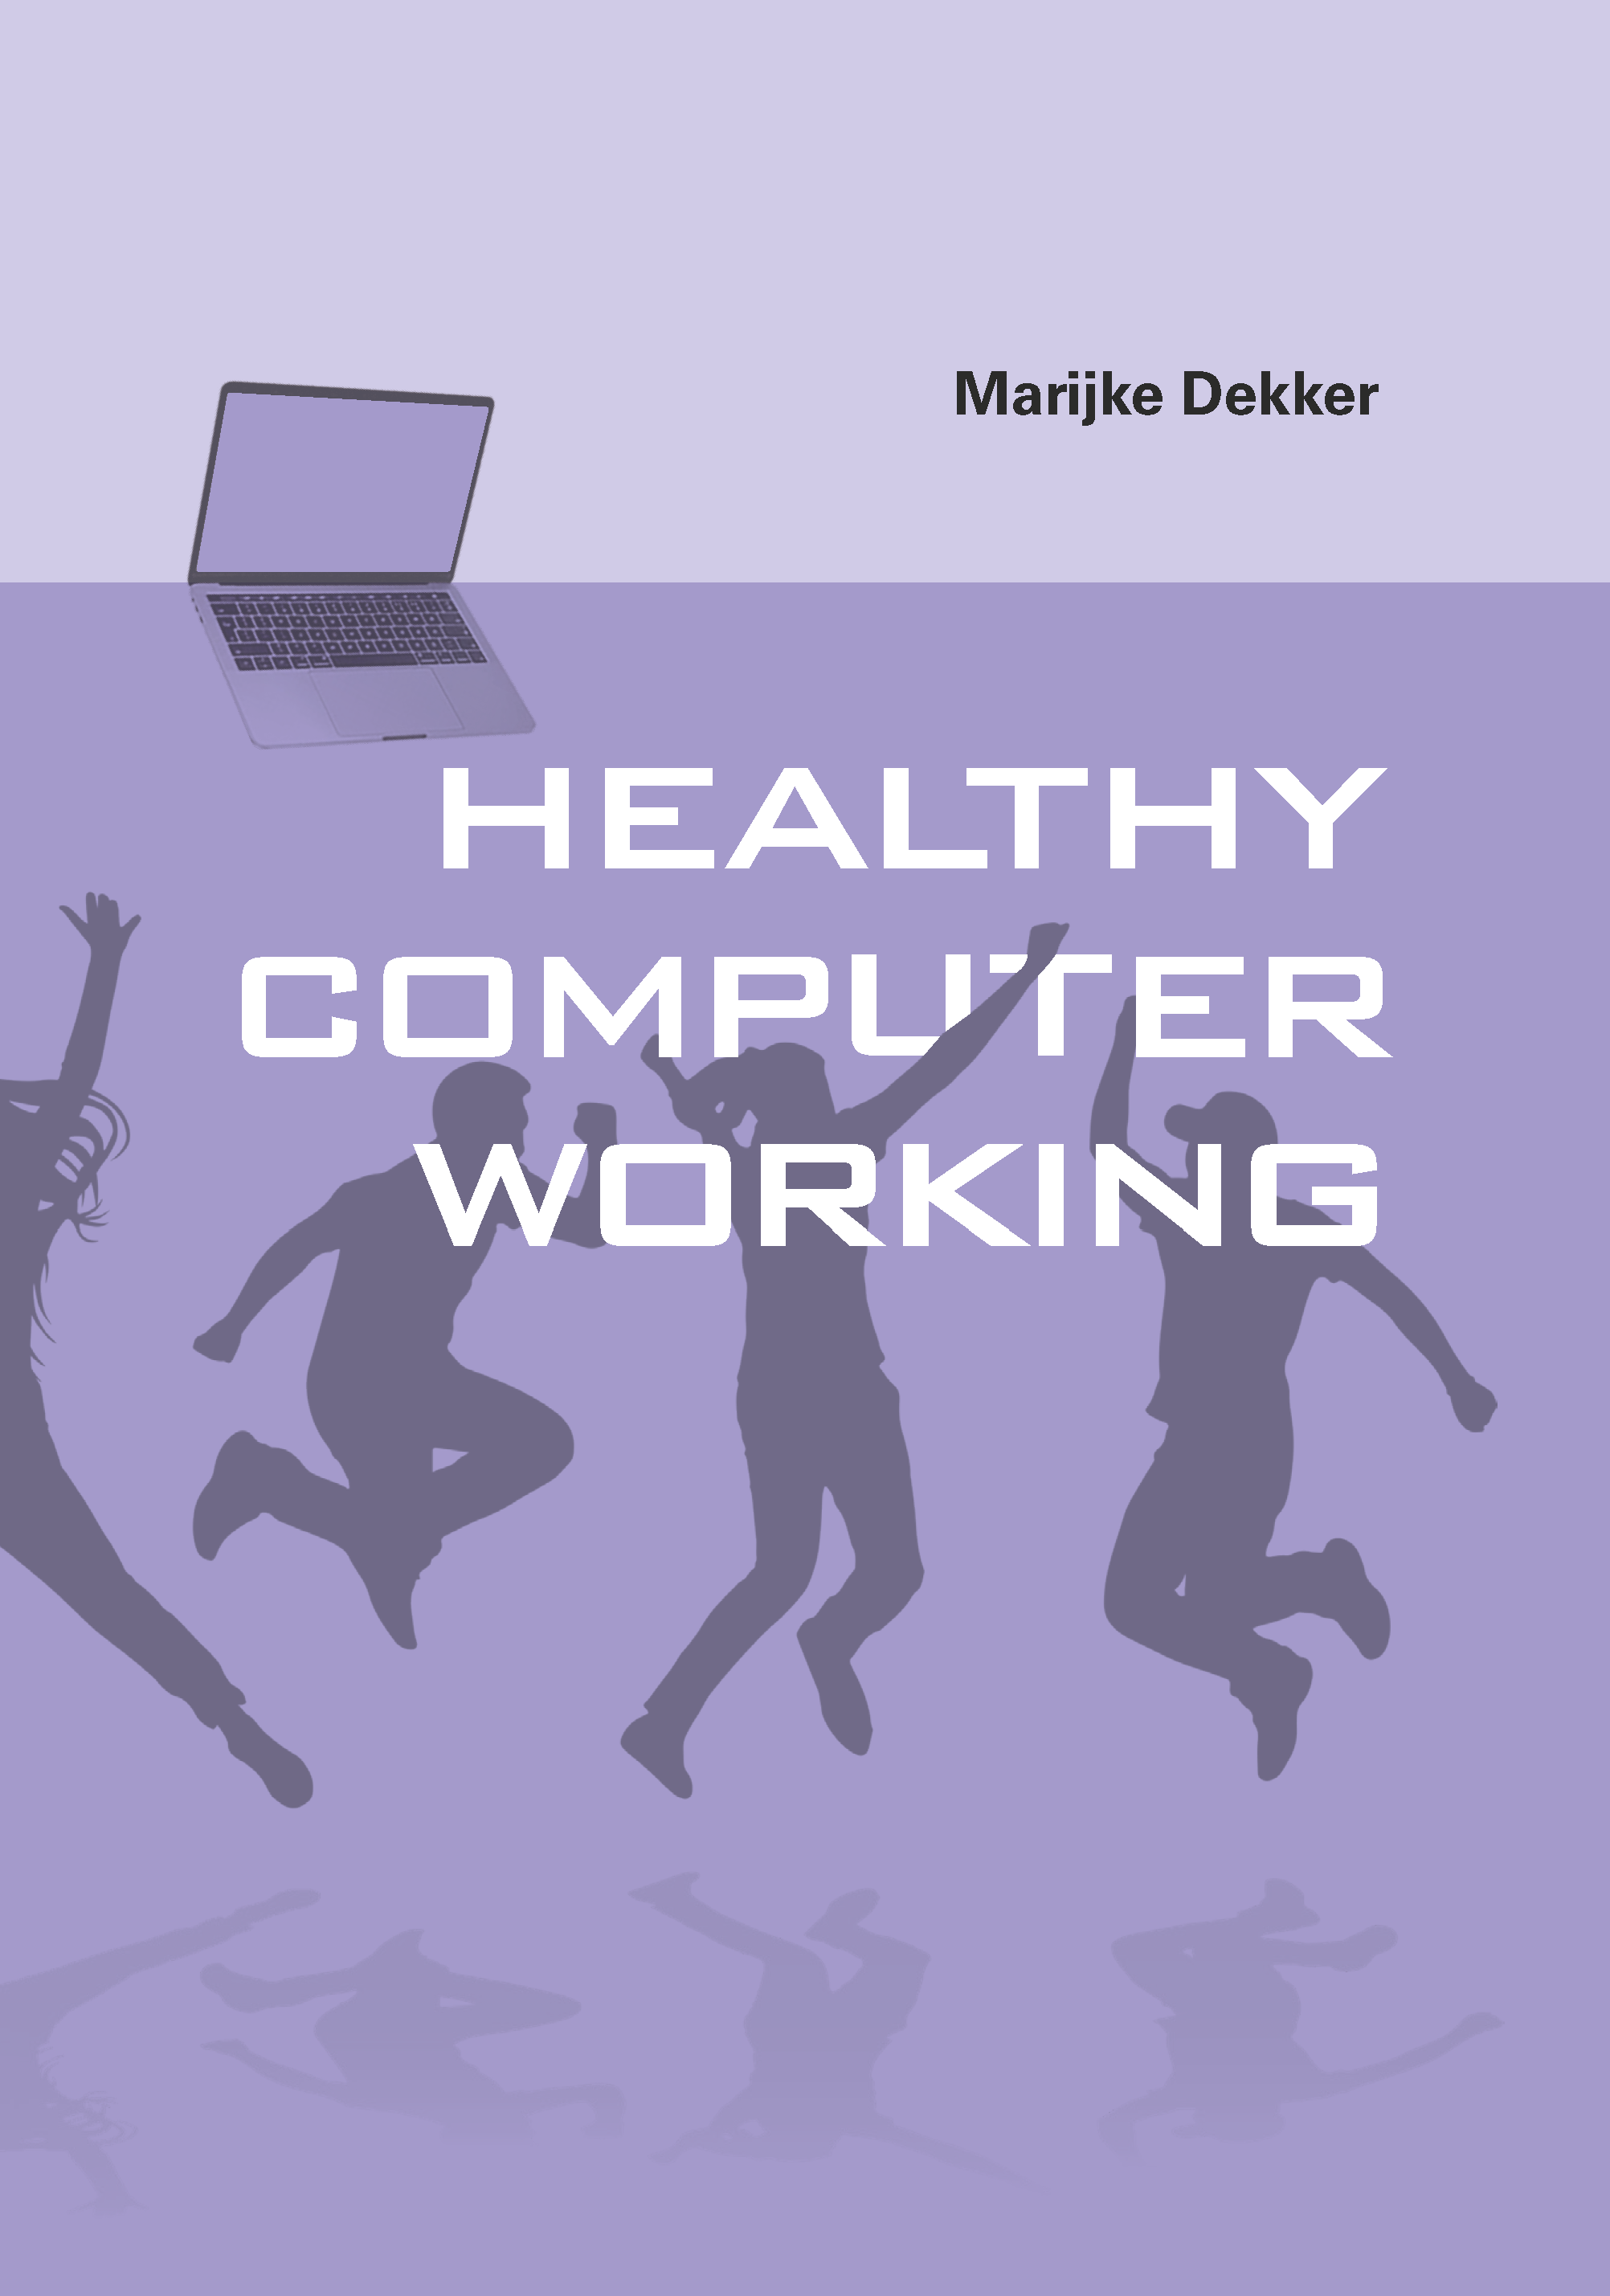 [Translate to English:] Thesis titled 'Healthy computer working' by Marijke Dekker